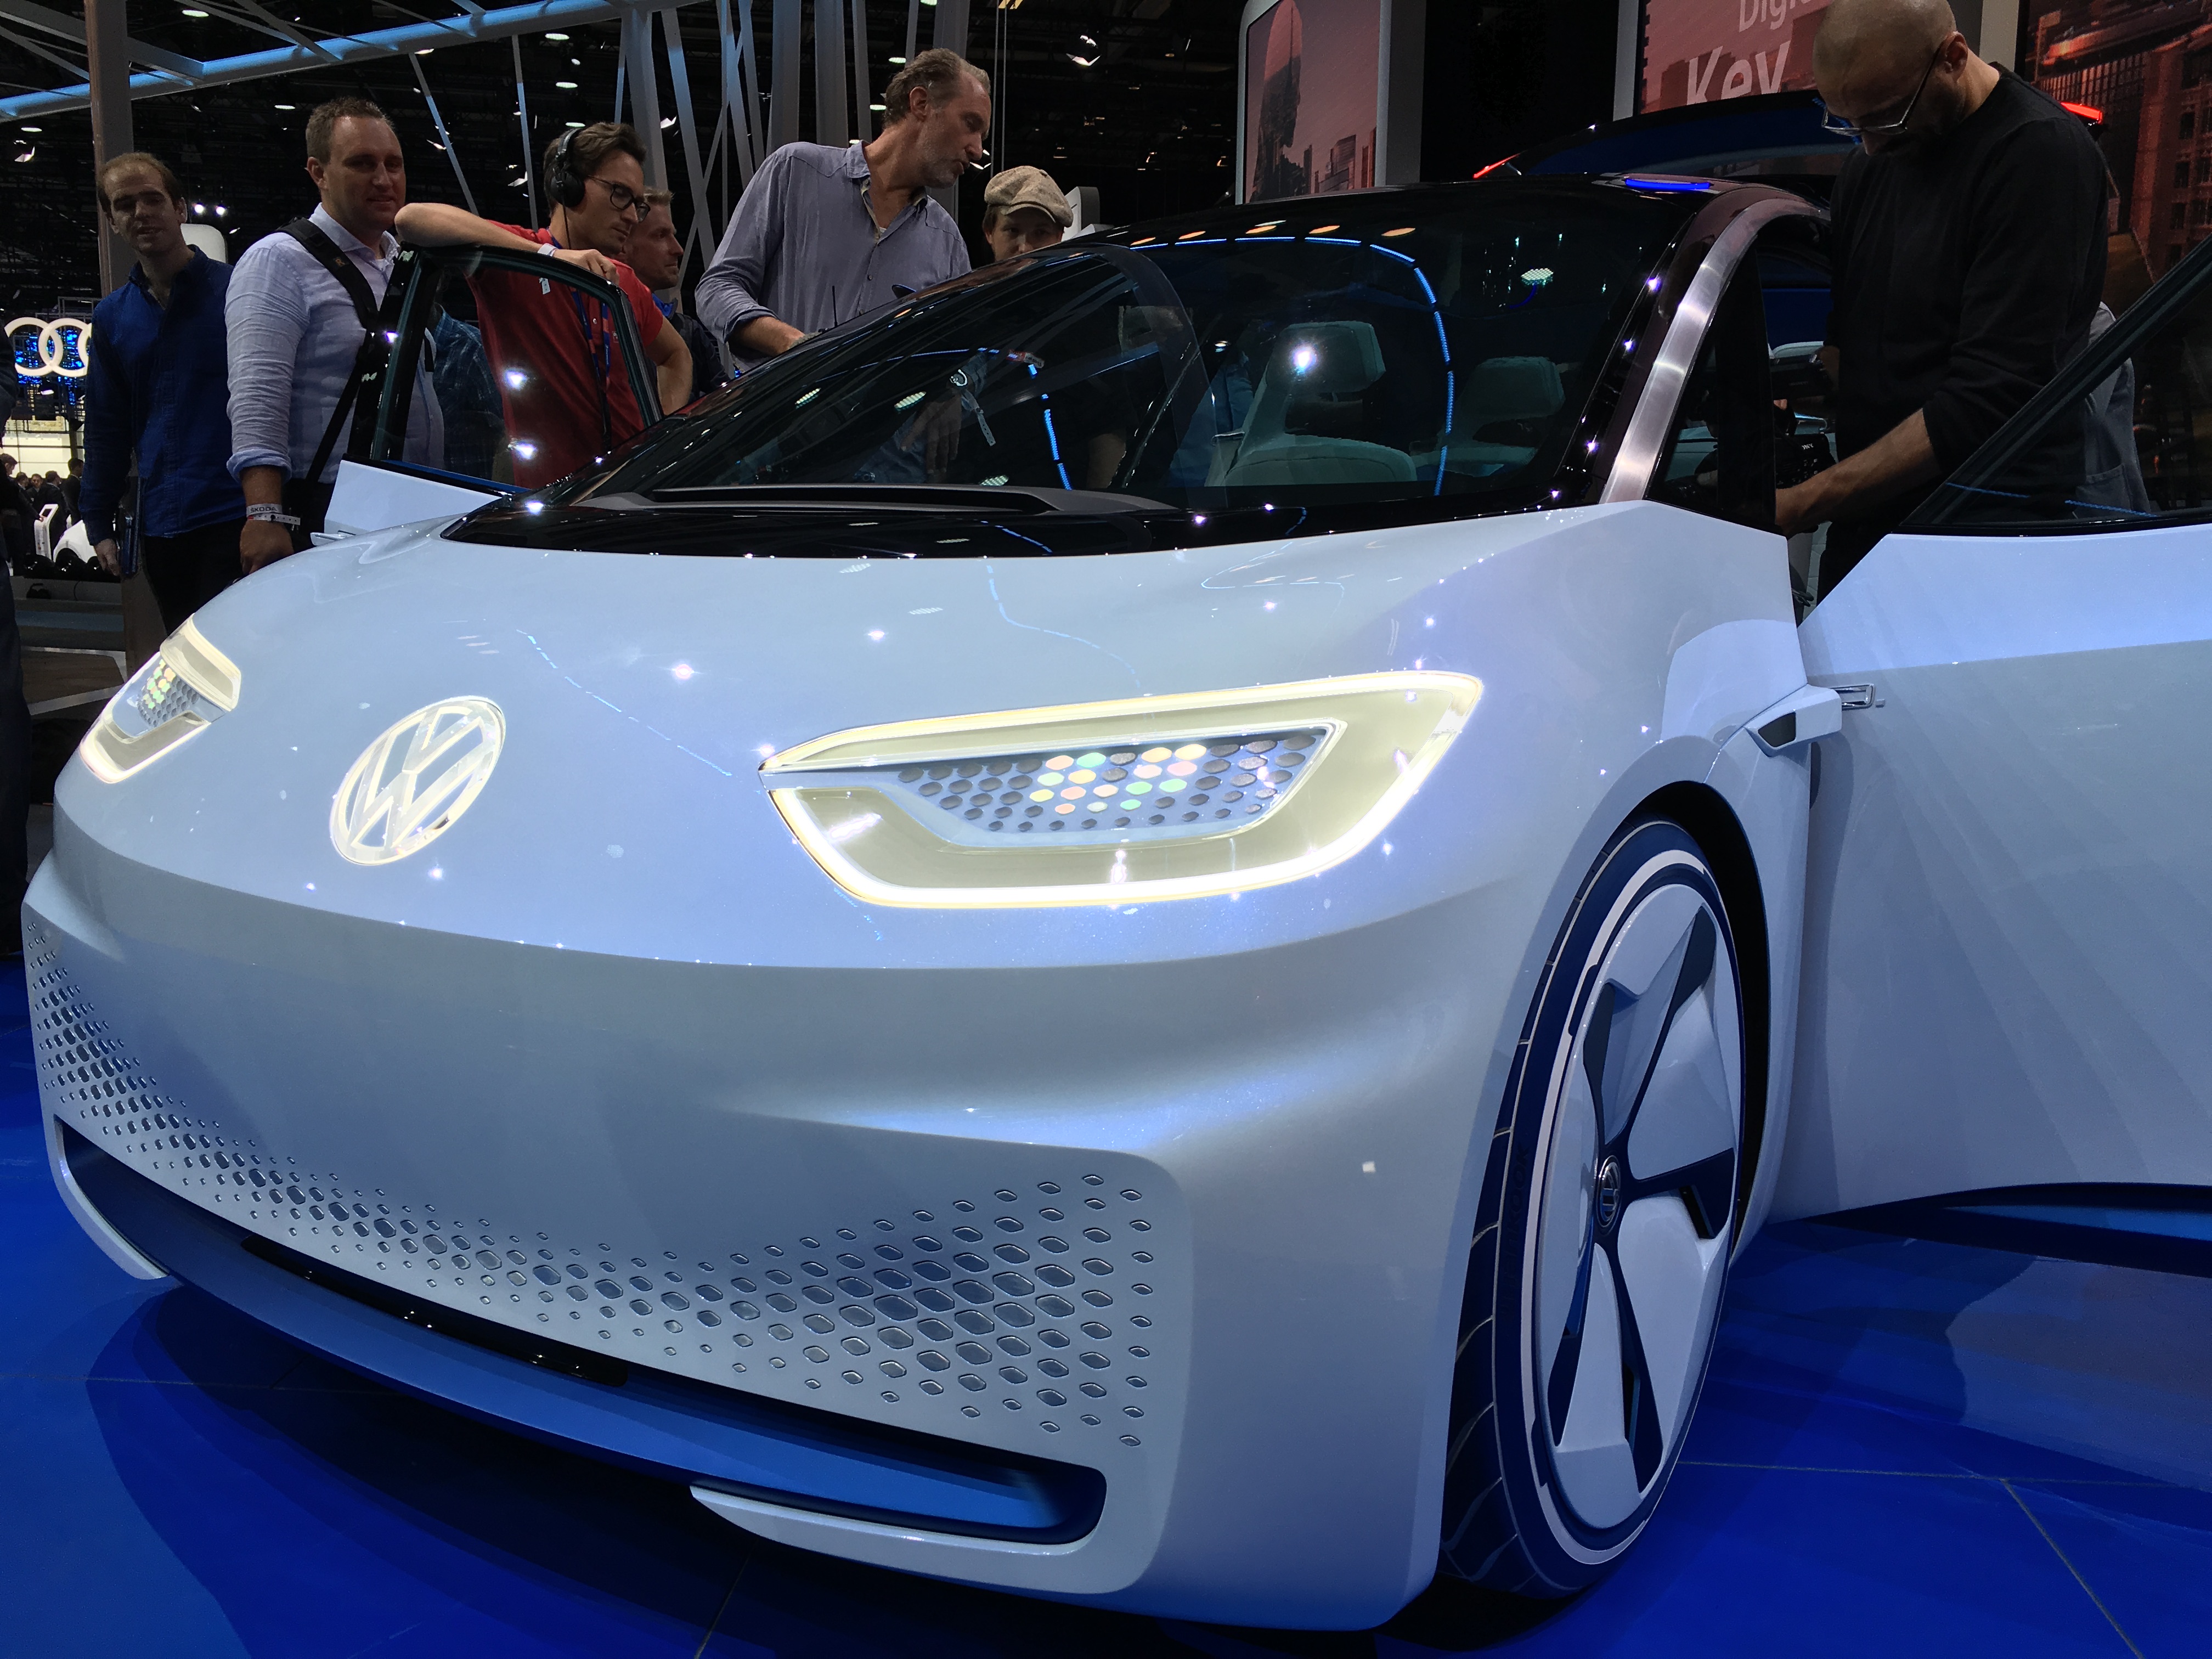 Volkswagen and Hyundai both plan to deploy self-driving taxis by 2021